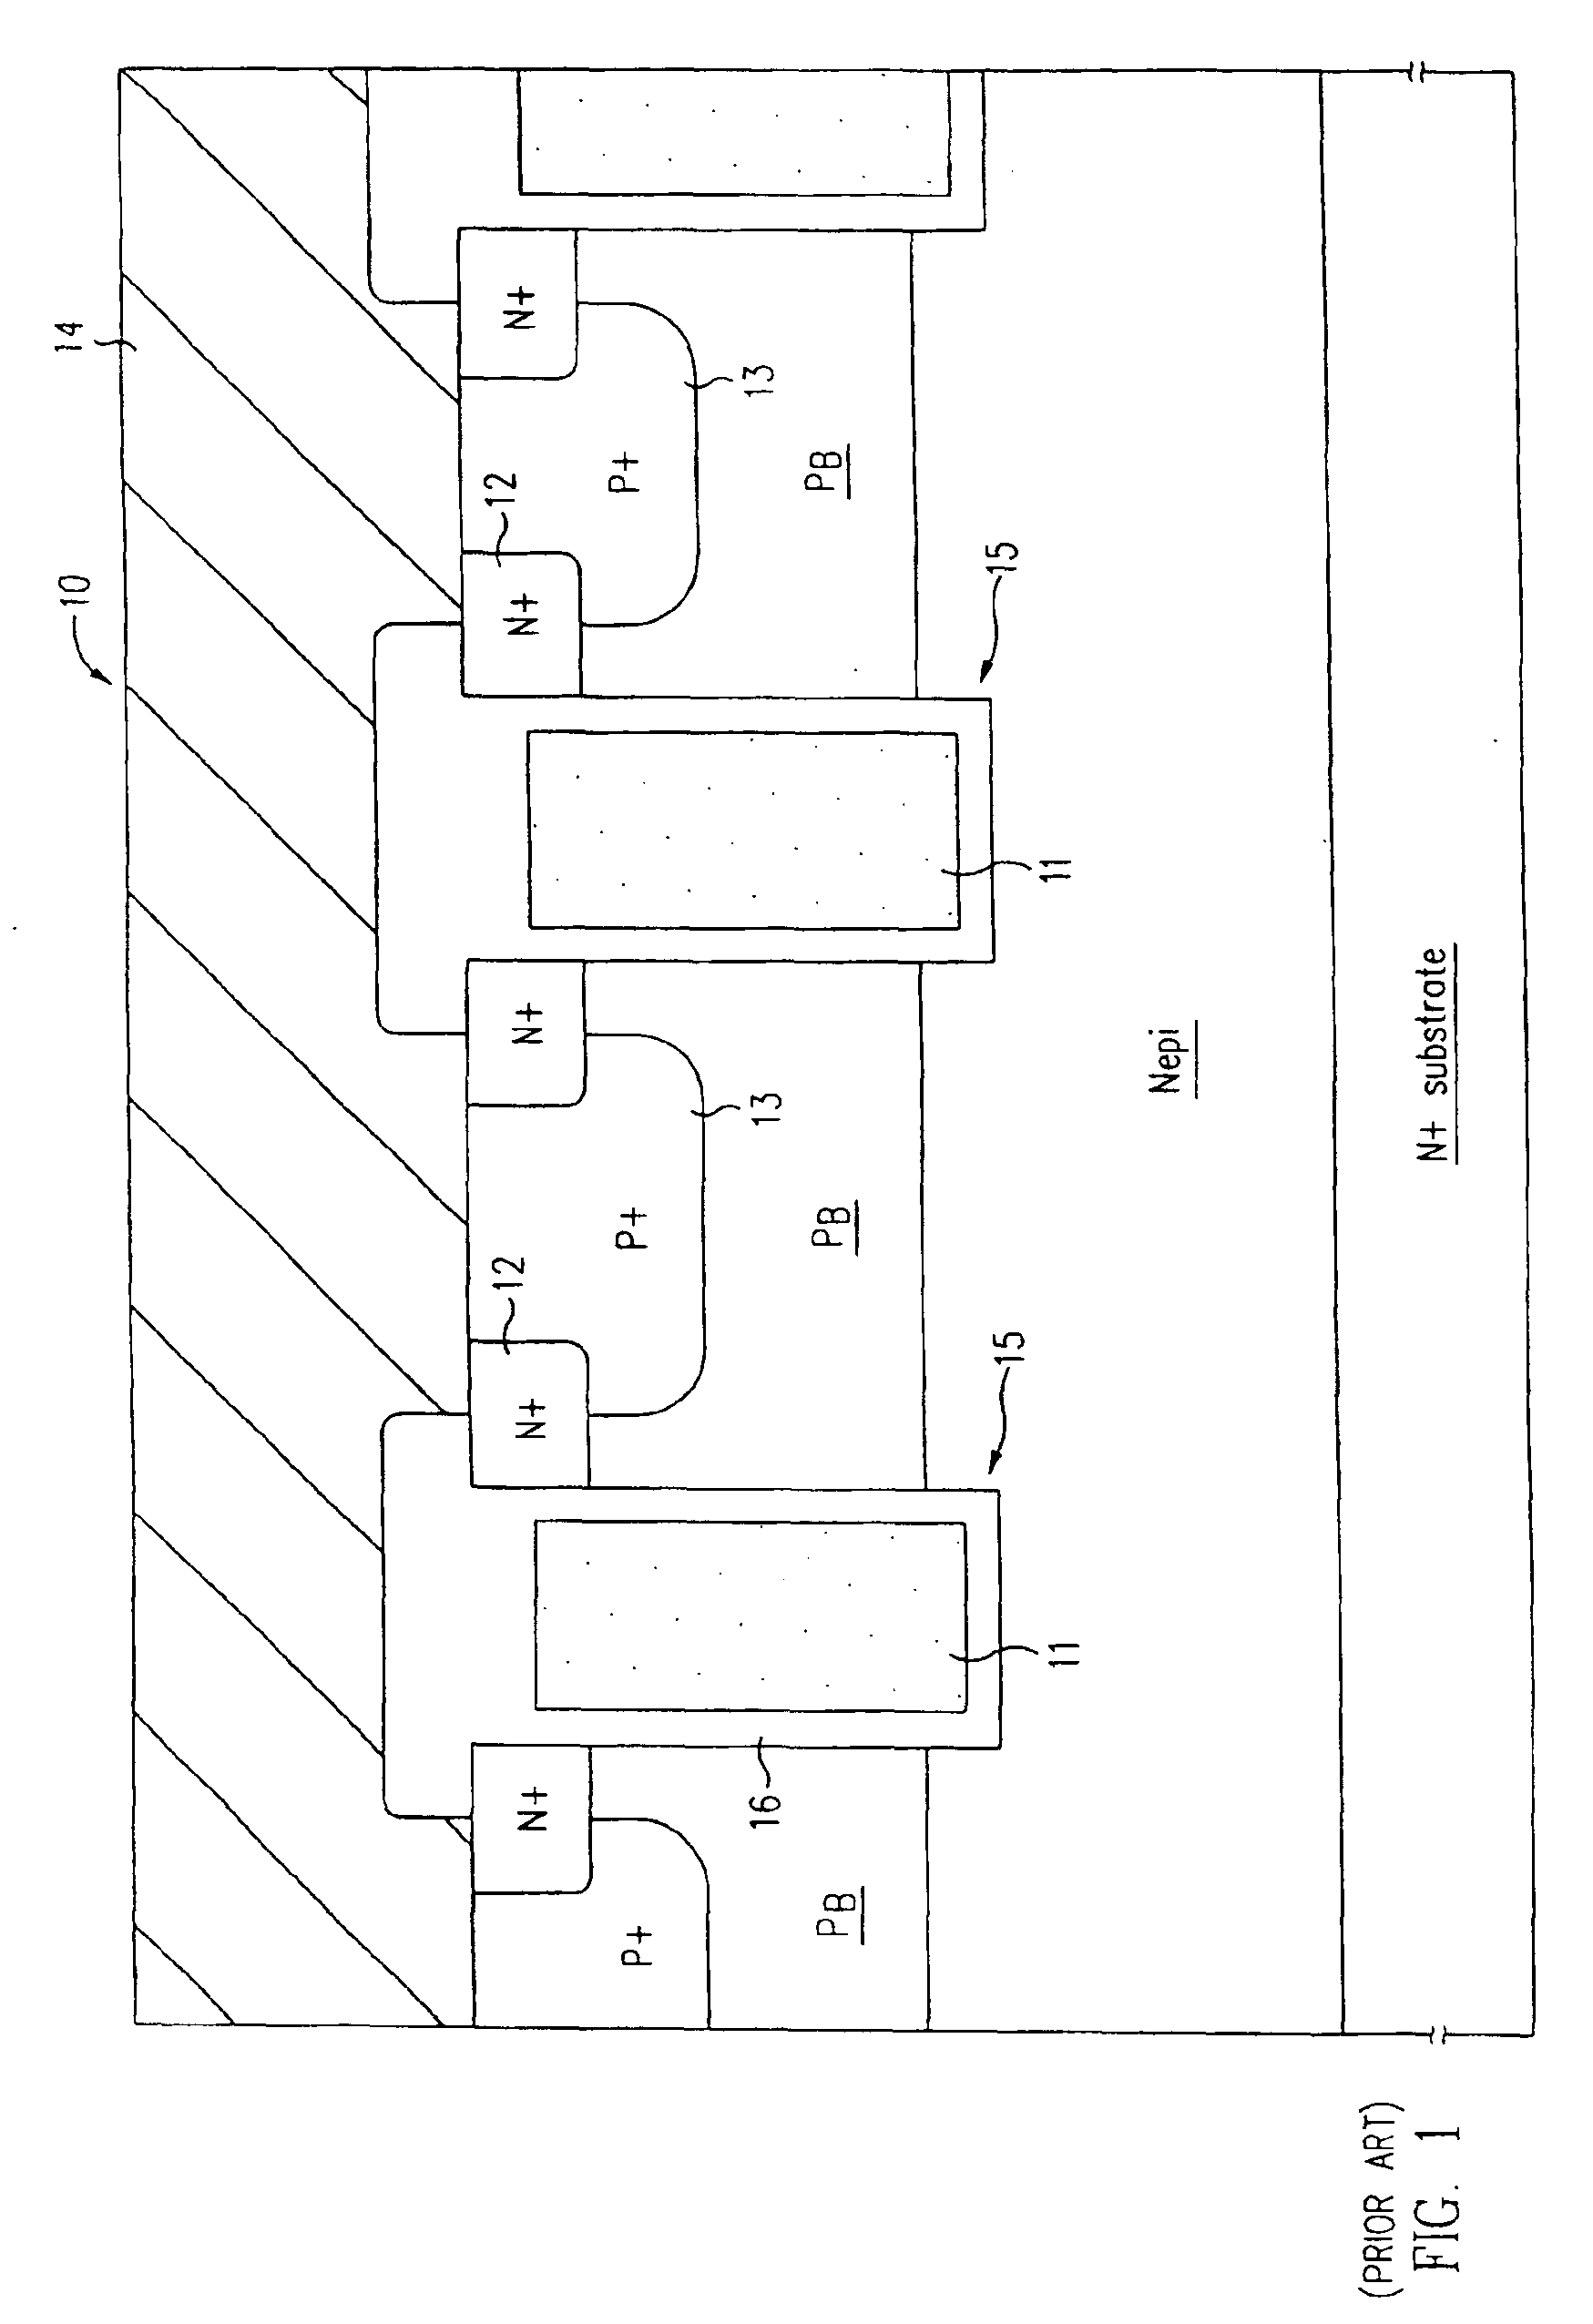 Self-aligned trench transistor using etched contact